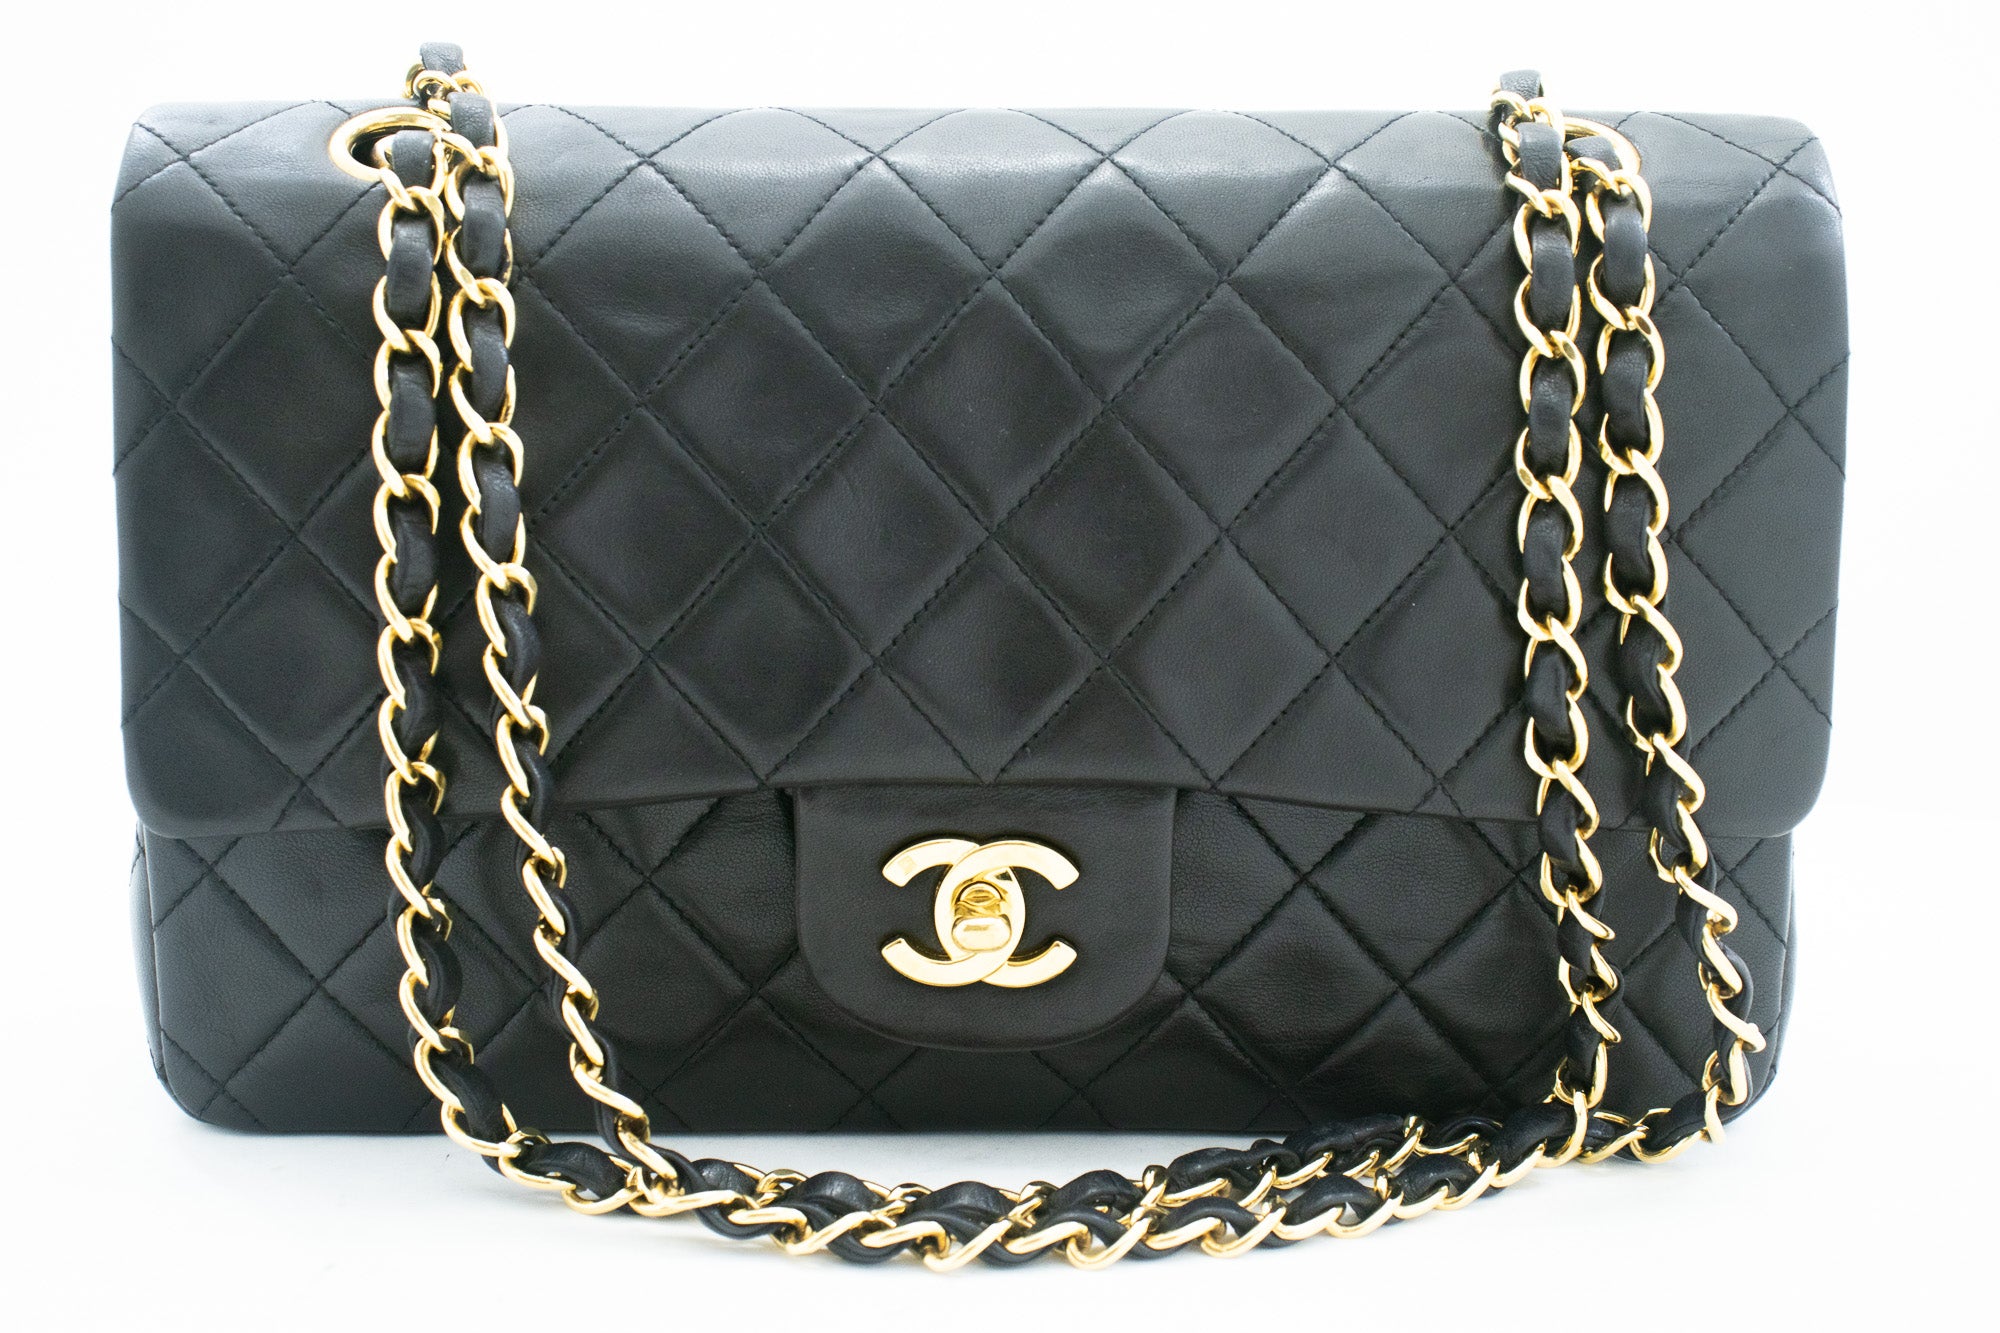 Chanel Black Lambskin Leather Quilted Classic Double Flap Small